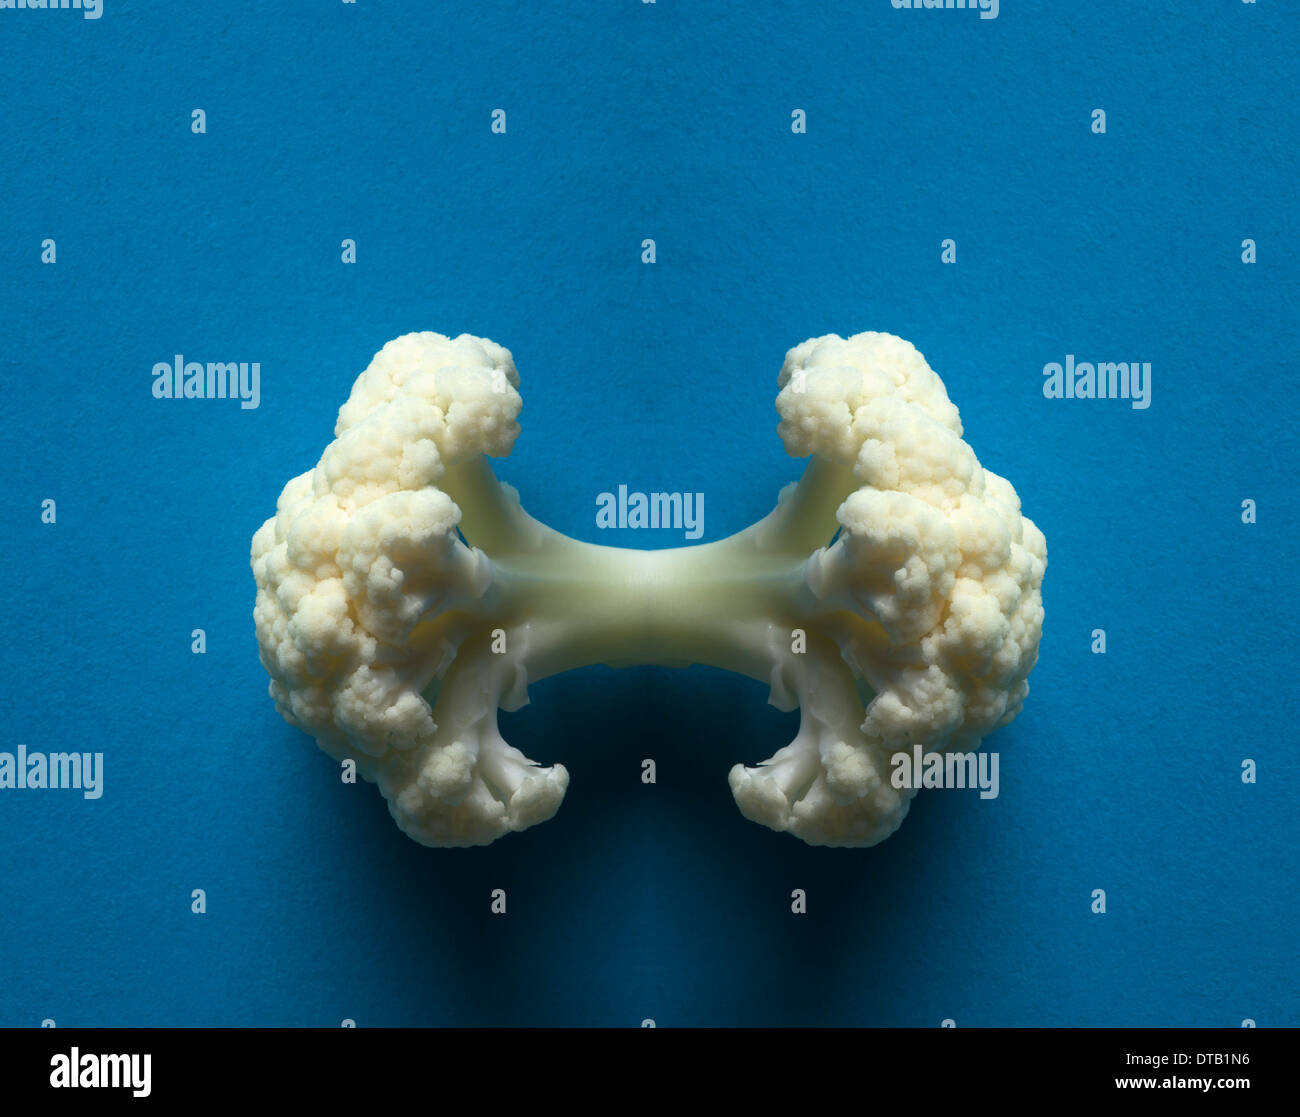 A digital composite of mirrored images of two pieces of cauliflower Stock Photo